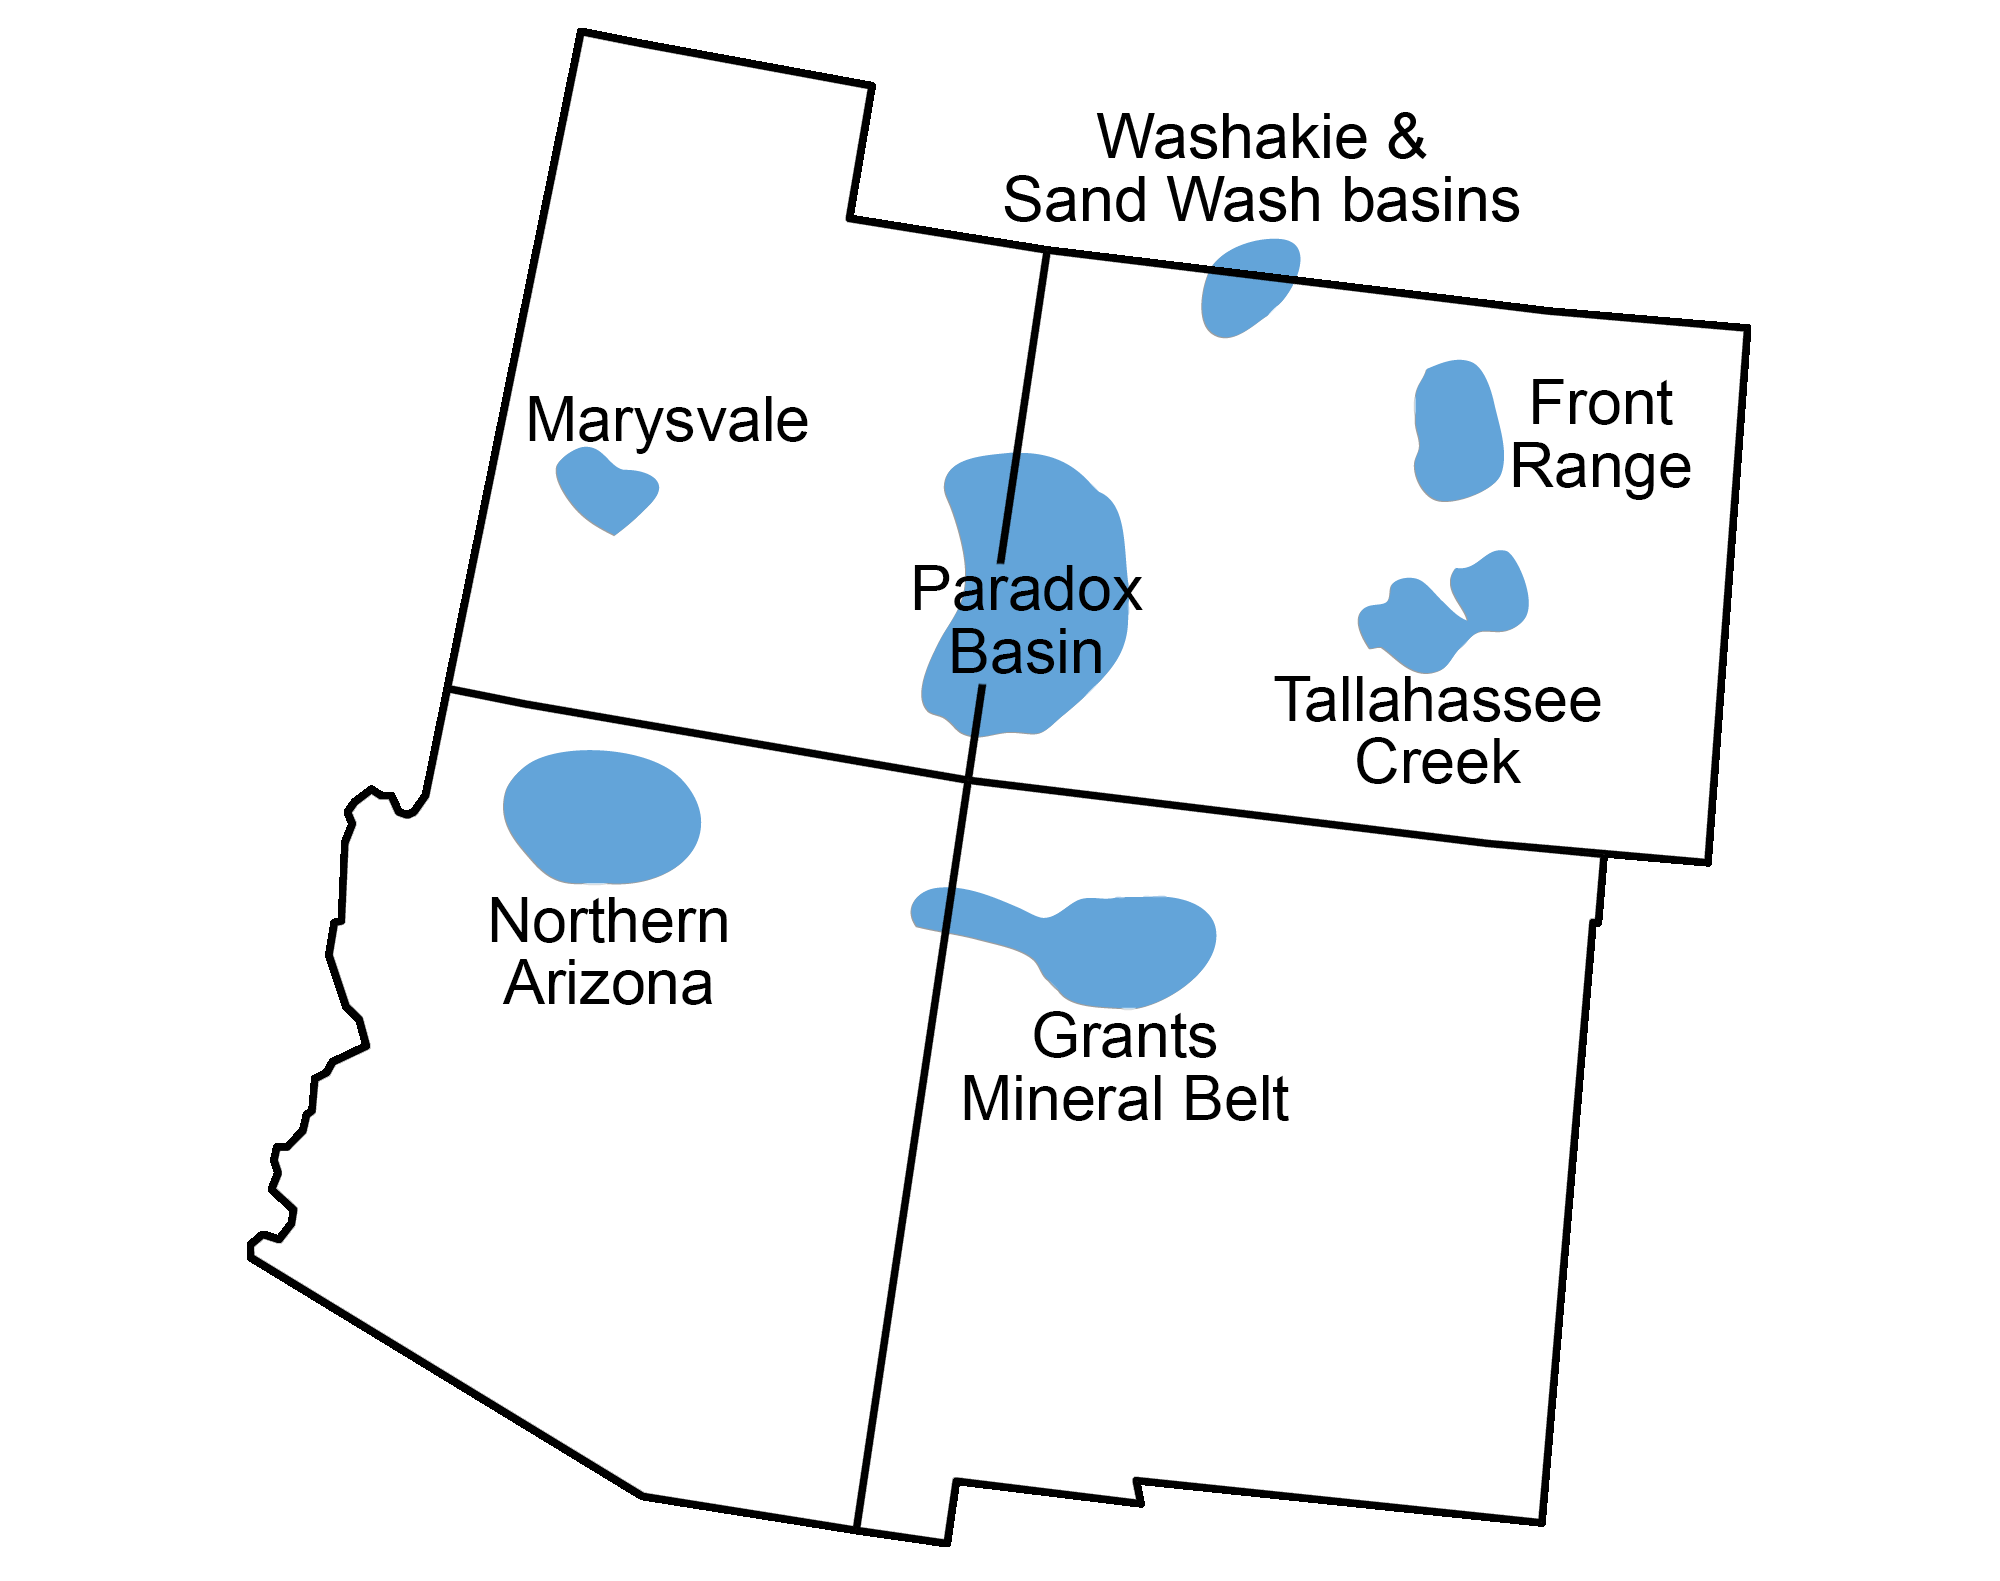 Map showing the four southwestern states (Arizona, Colorado, New Mexico, and Utah) with uranium deposits shaded in blue. Deposits include the Marysvale in western Utah, the Paradox Basin on the Utah-Colorado border, a deposit in northern Arizona, the Grants Mineral Belt on the northern Arizona-Utah border, the Front Range and Tallahassee Creek in eastern Colorado, and Washakie and Sand Wash basins on the Colorado-Wyoming border.